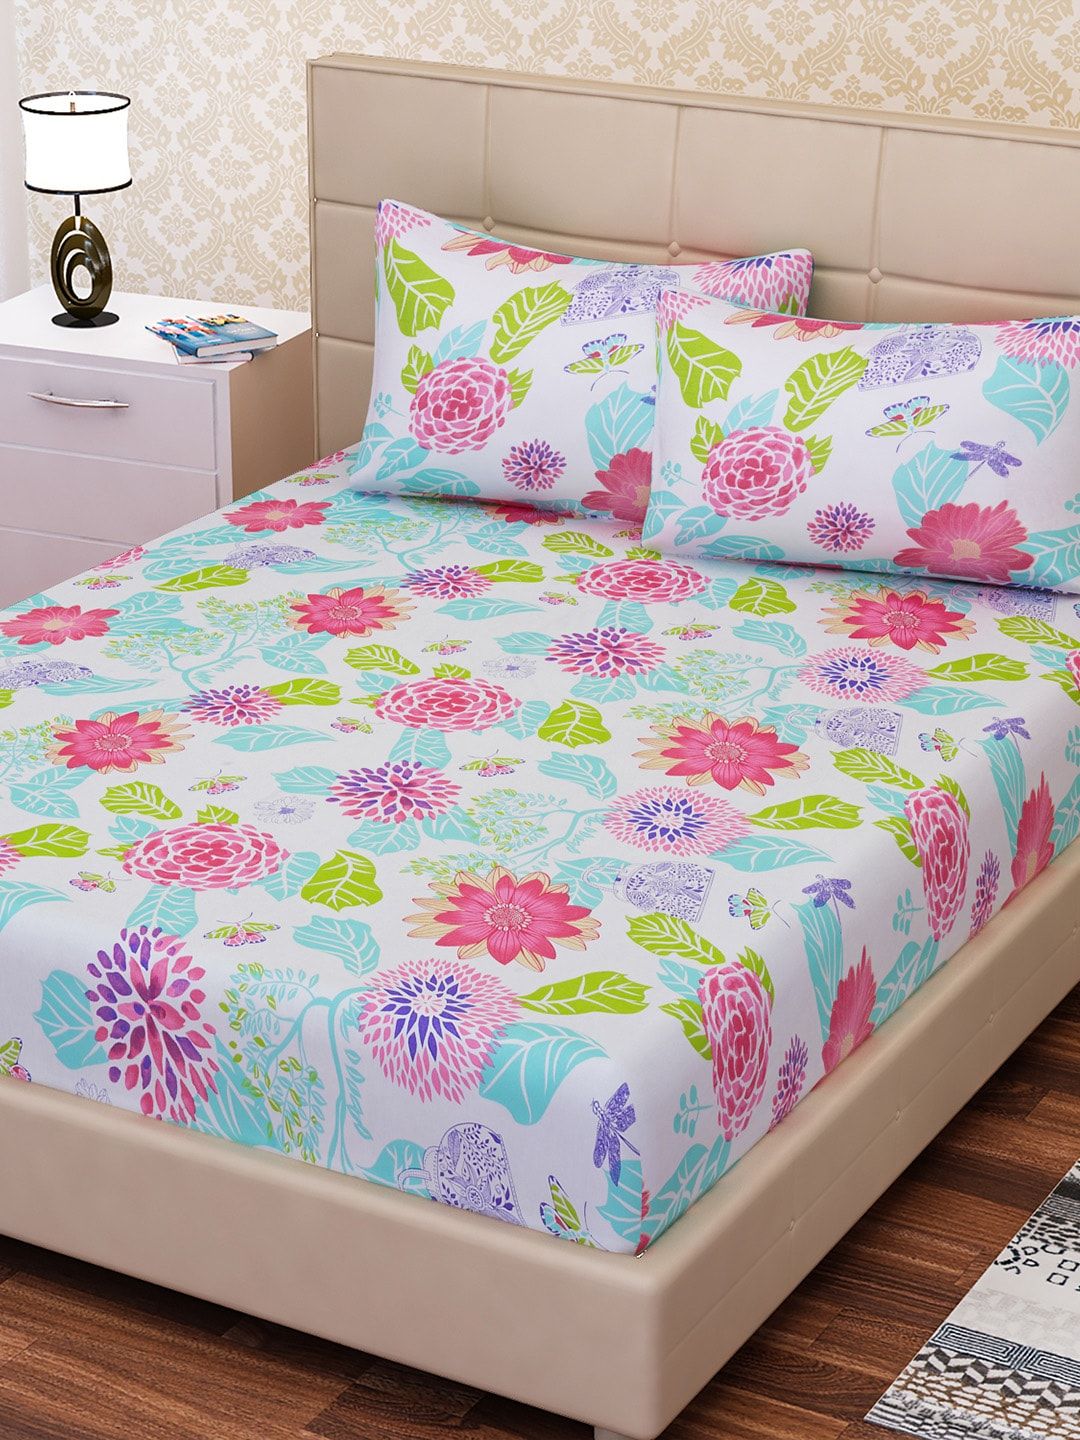 SEJ by Nisha Gupta White & Pink Cotton 144 TC Double King Bedsheet With 2 Pillow Covers Price in India